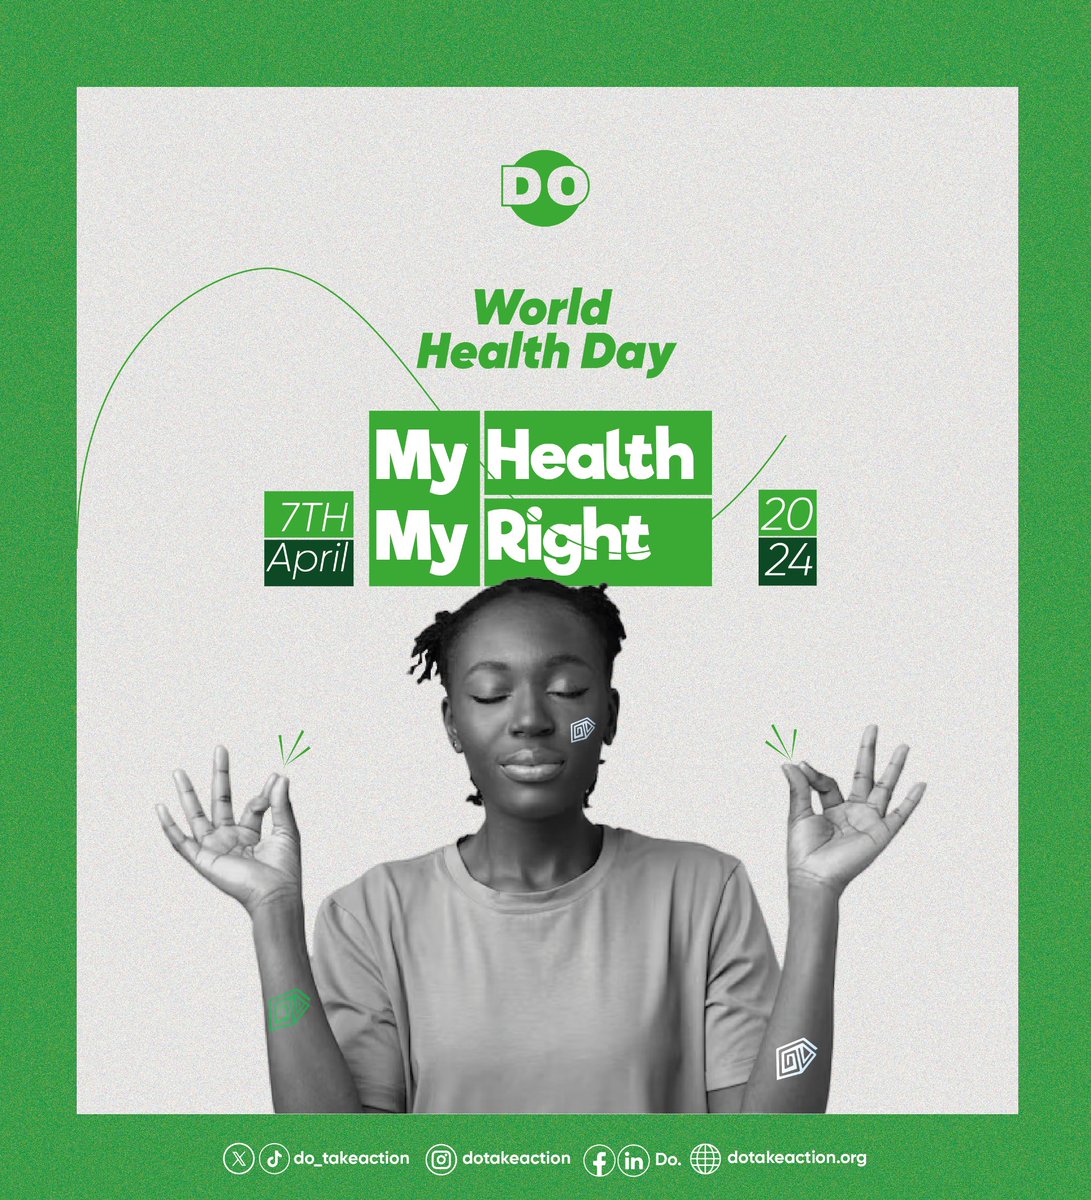 We stand with millions advocating for equal access to healthcare as a basic human right. Every health system needs to provide quality services, including reproductive health care, that reach everyone. Join the movement - health is a right, not a privilege! #StandUpForHealth